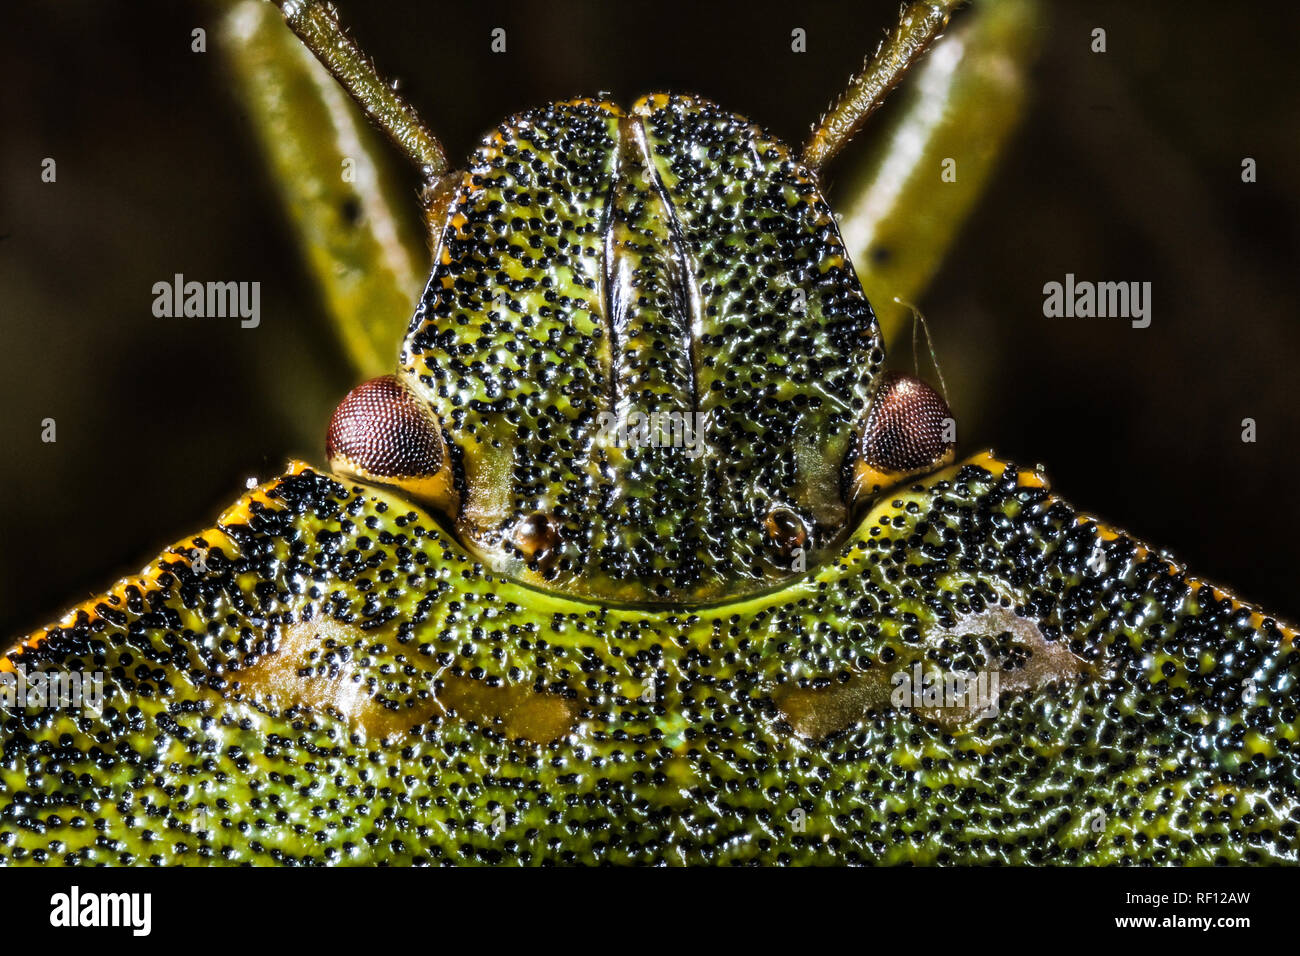 shield bug focus stack of head showing texture of exoskeleton Stock Photo